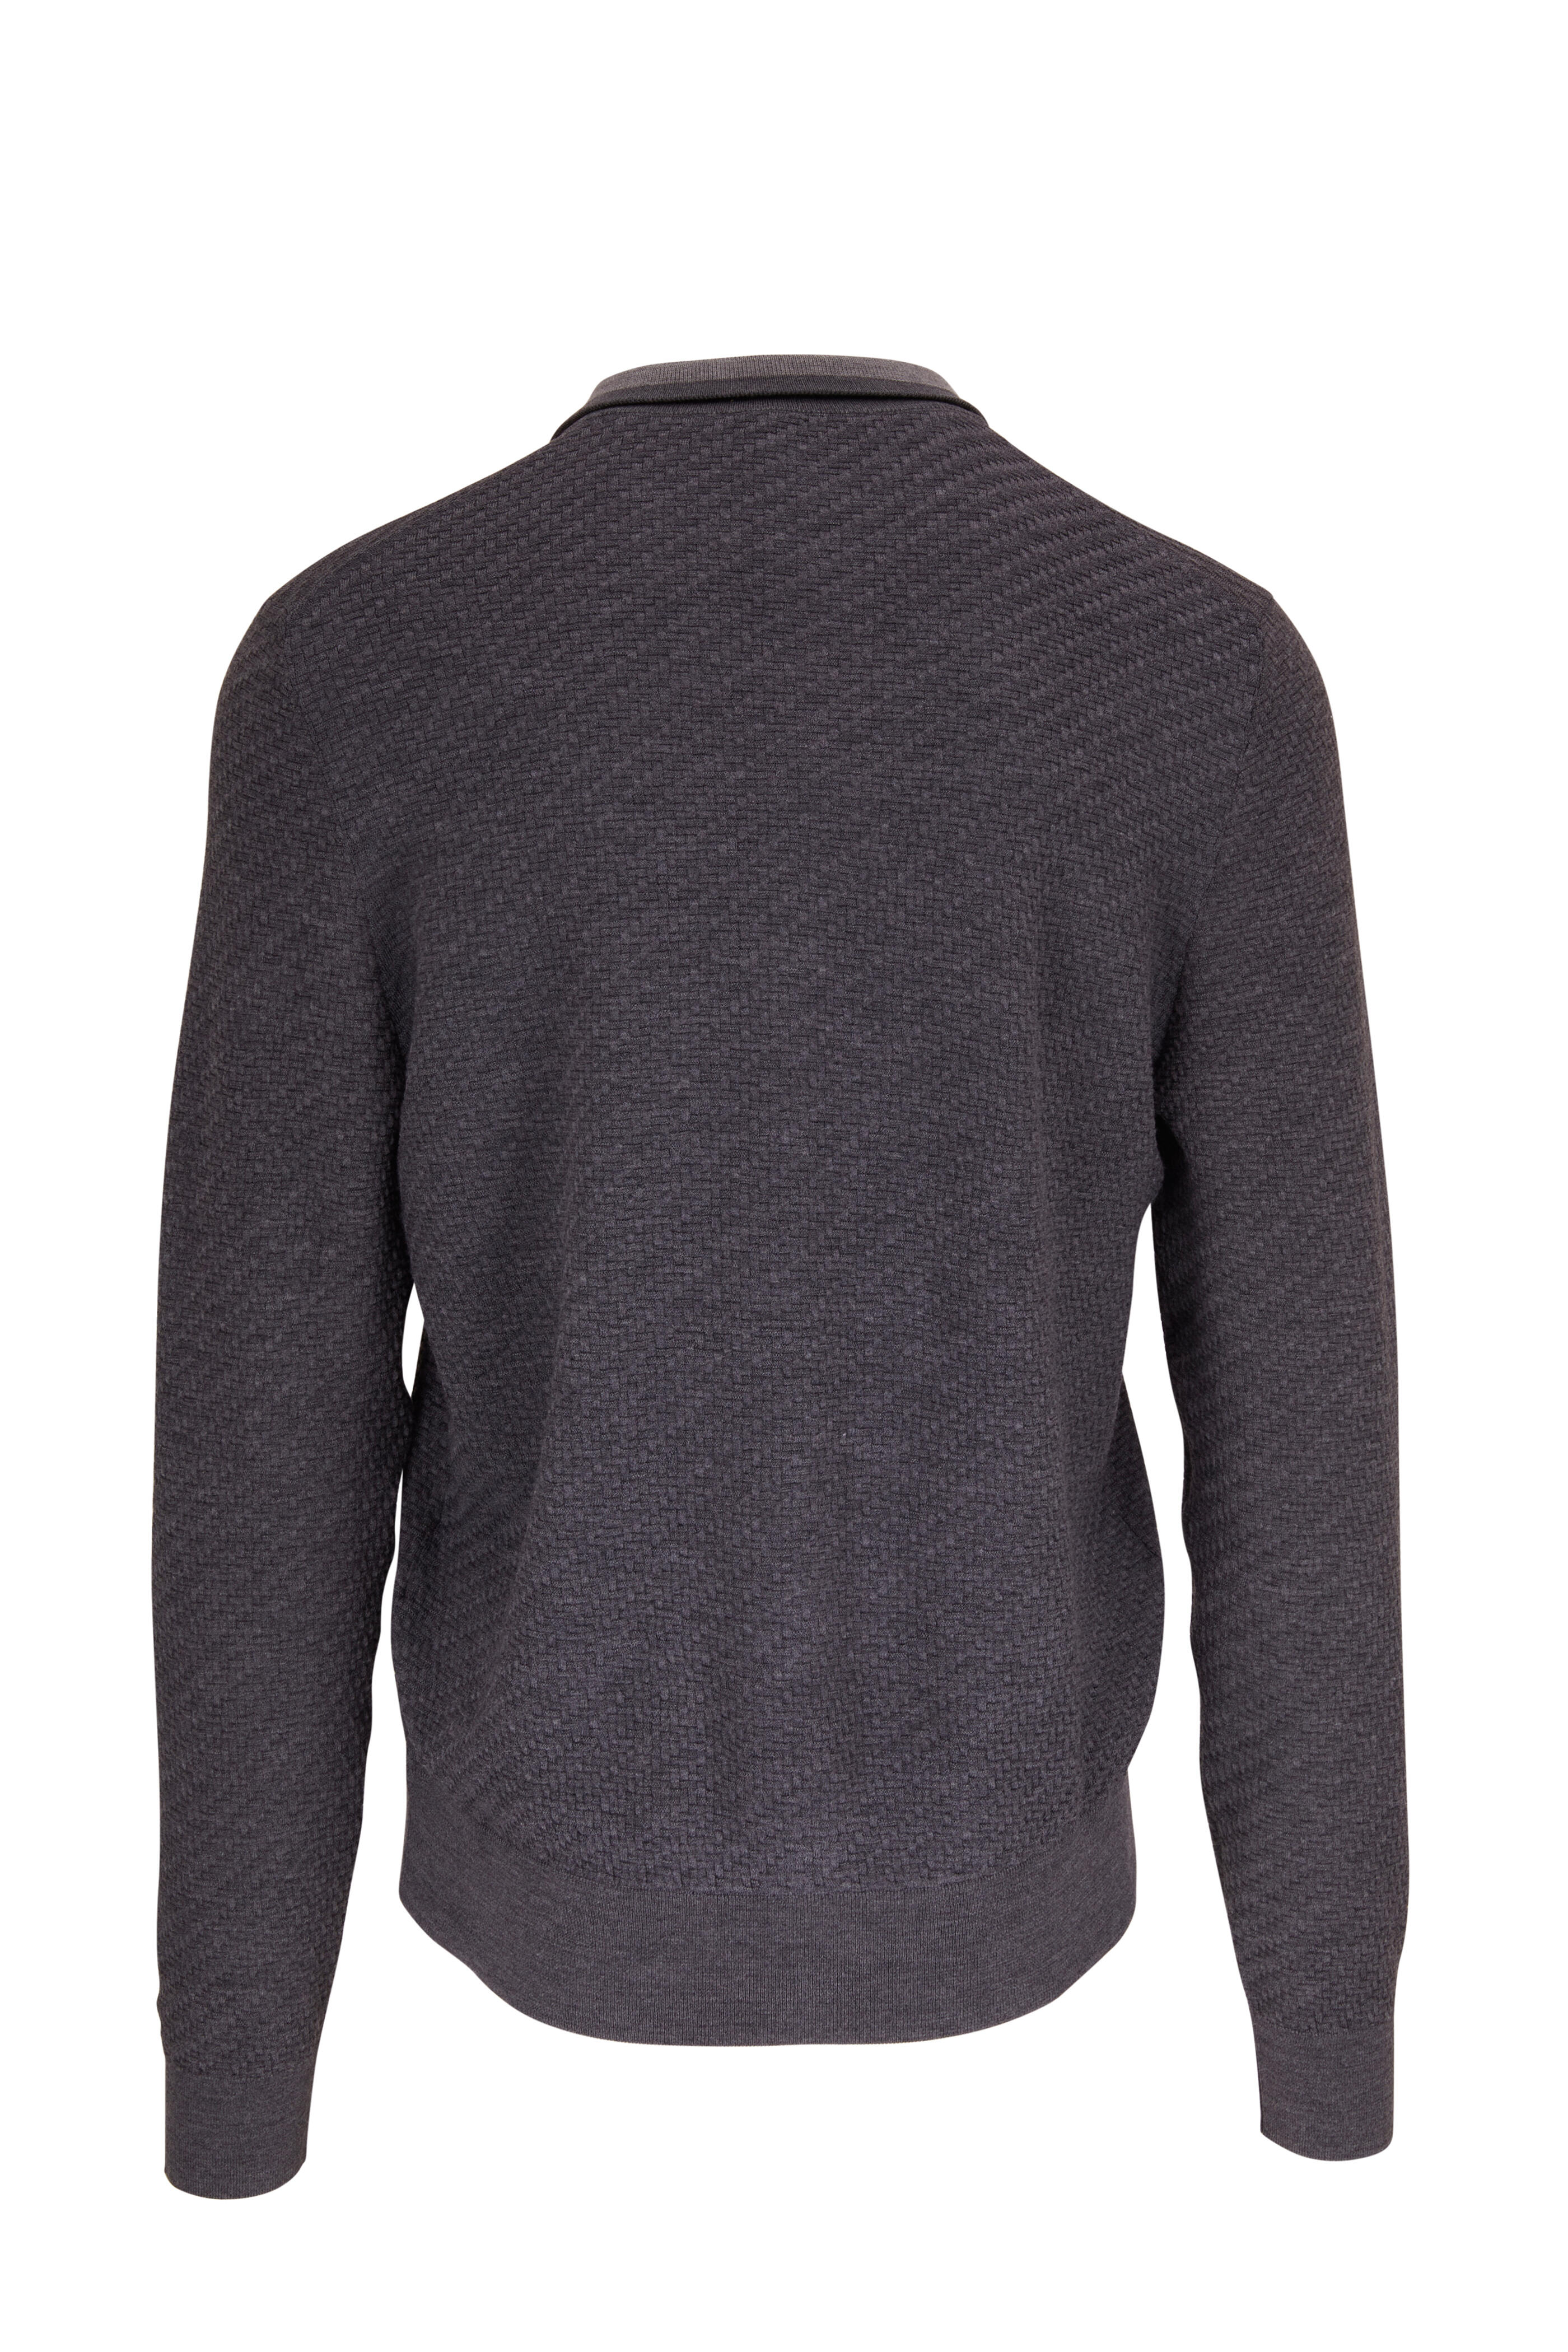 Brioni - Gray Wool & Cashmere Front Zip Sweater | Mitchell Stores